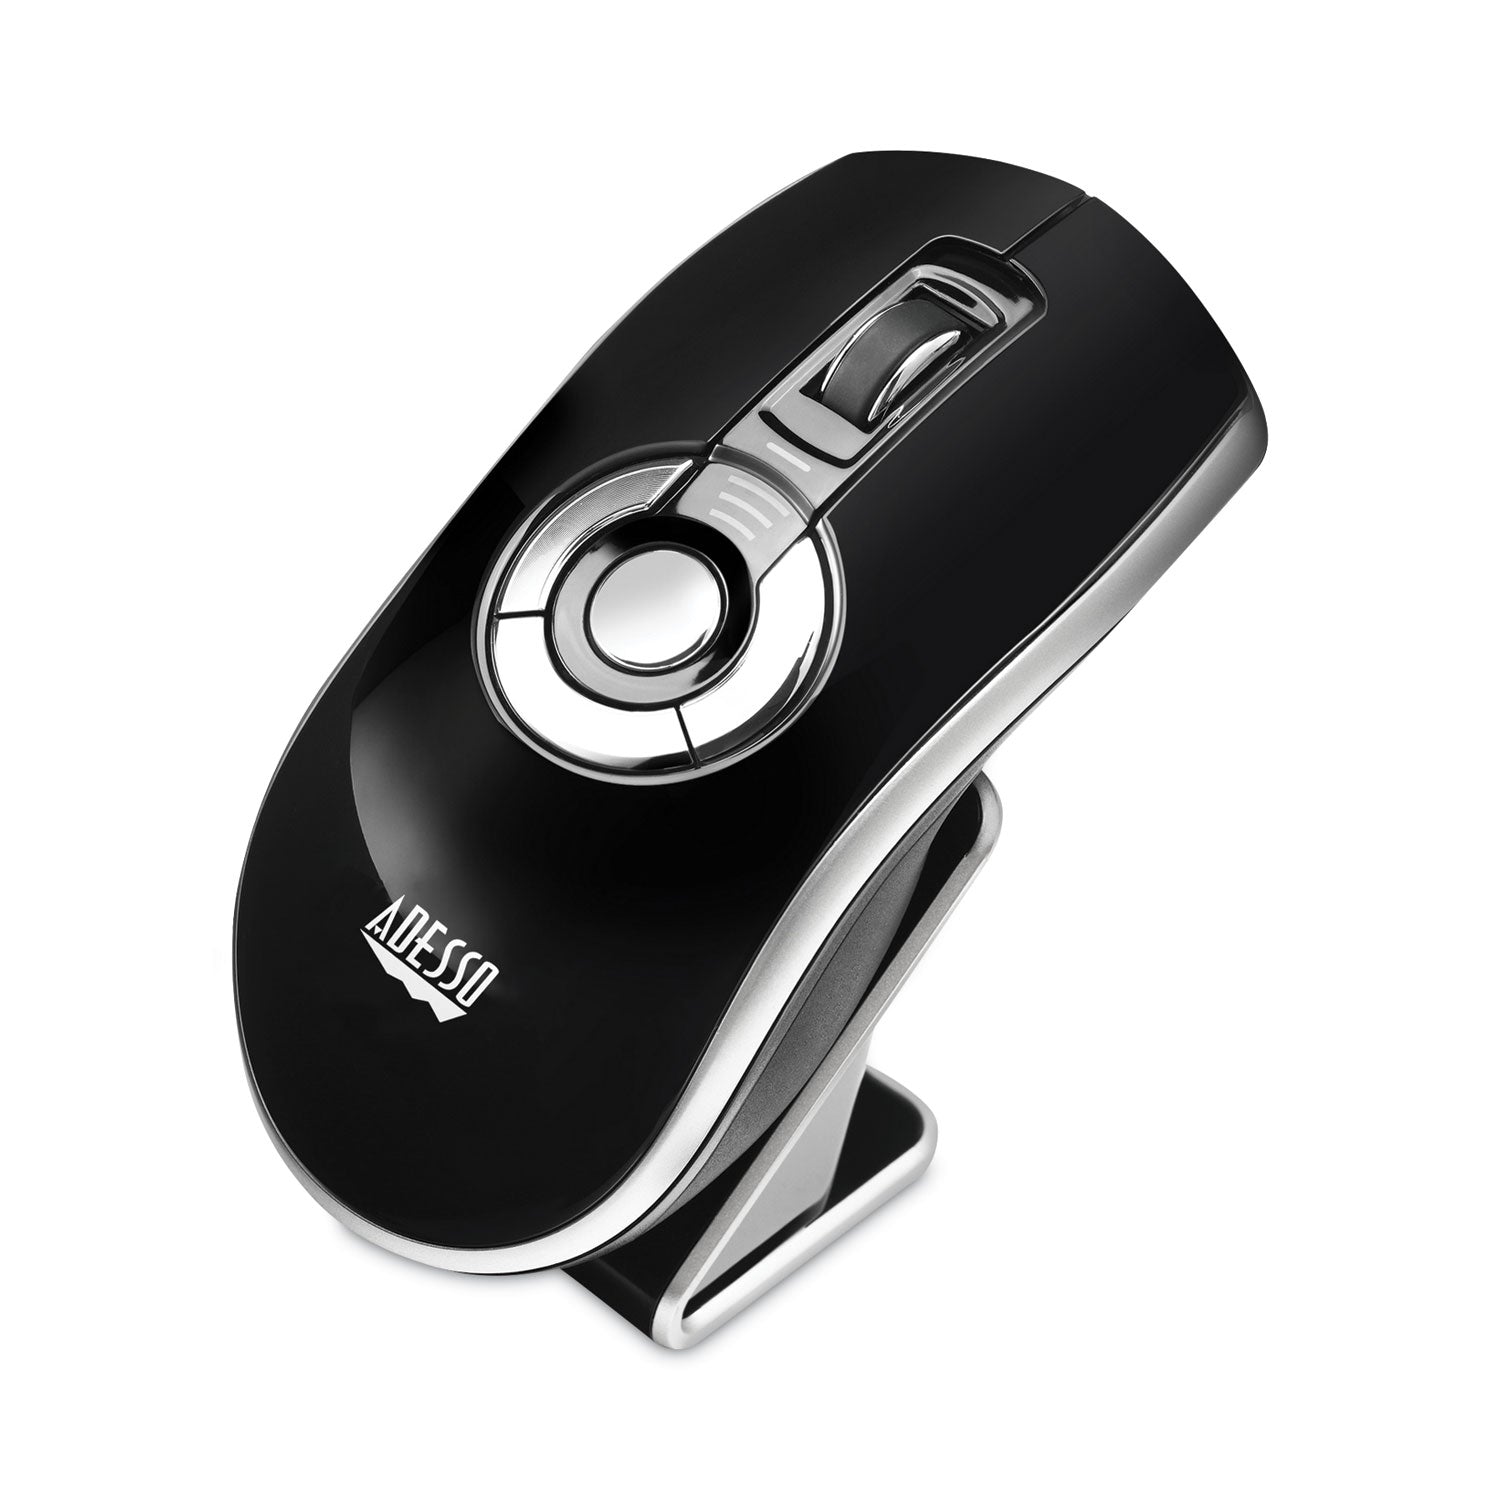 air-mouse-elite-wireless-presenter-mouse-24-ghz-frequency-100-ft-wireless-range-left-right-hand-use-black_adeimousep20 - 1